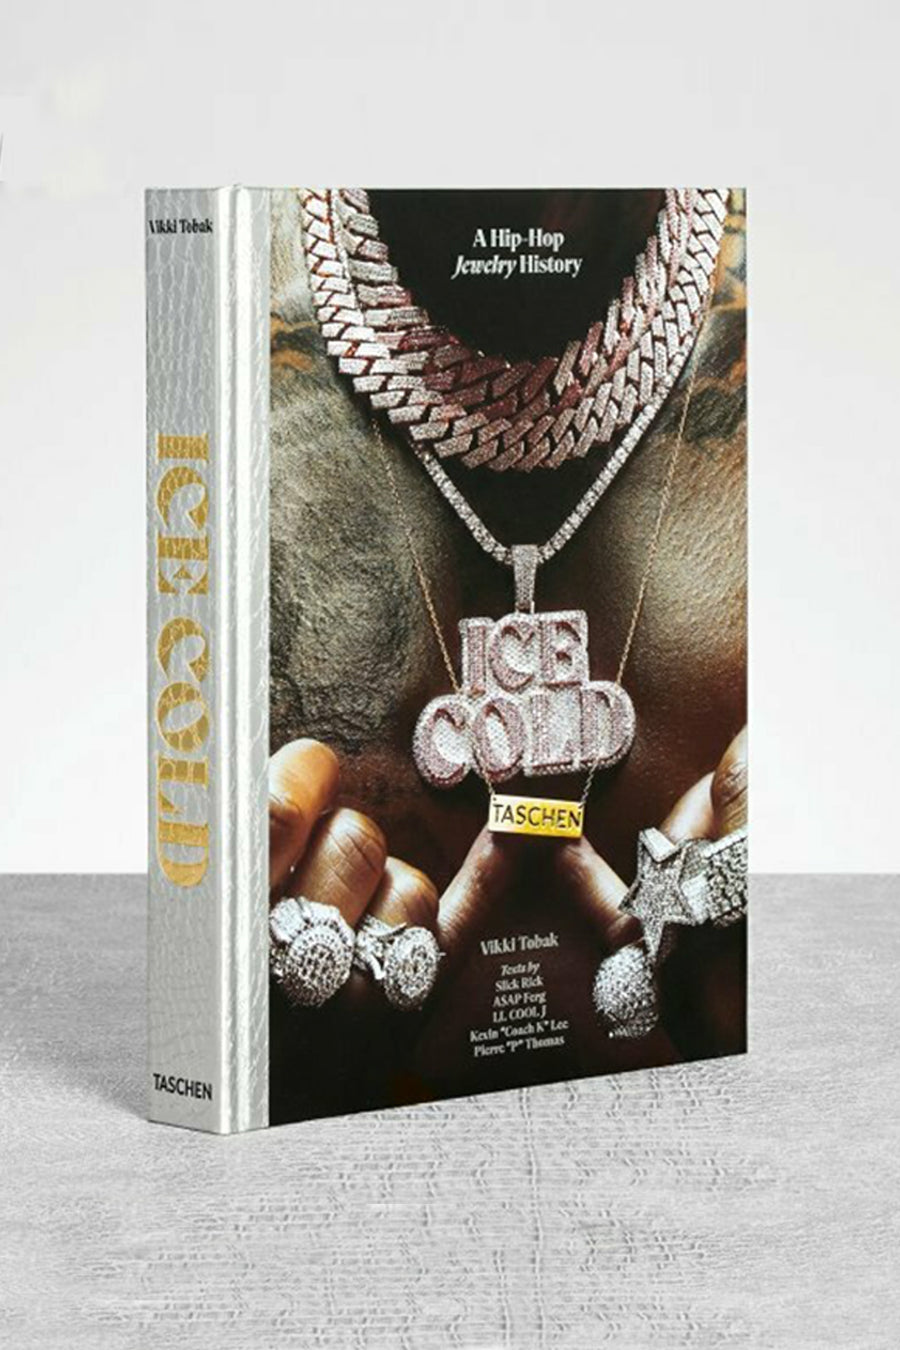 ICE COLD: HIP HOP JEWELRY – The Ozone